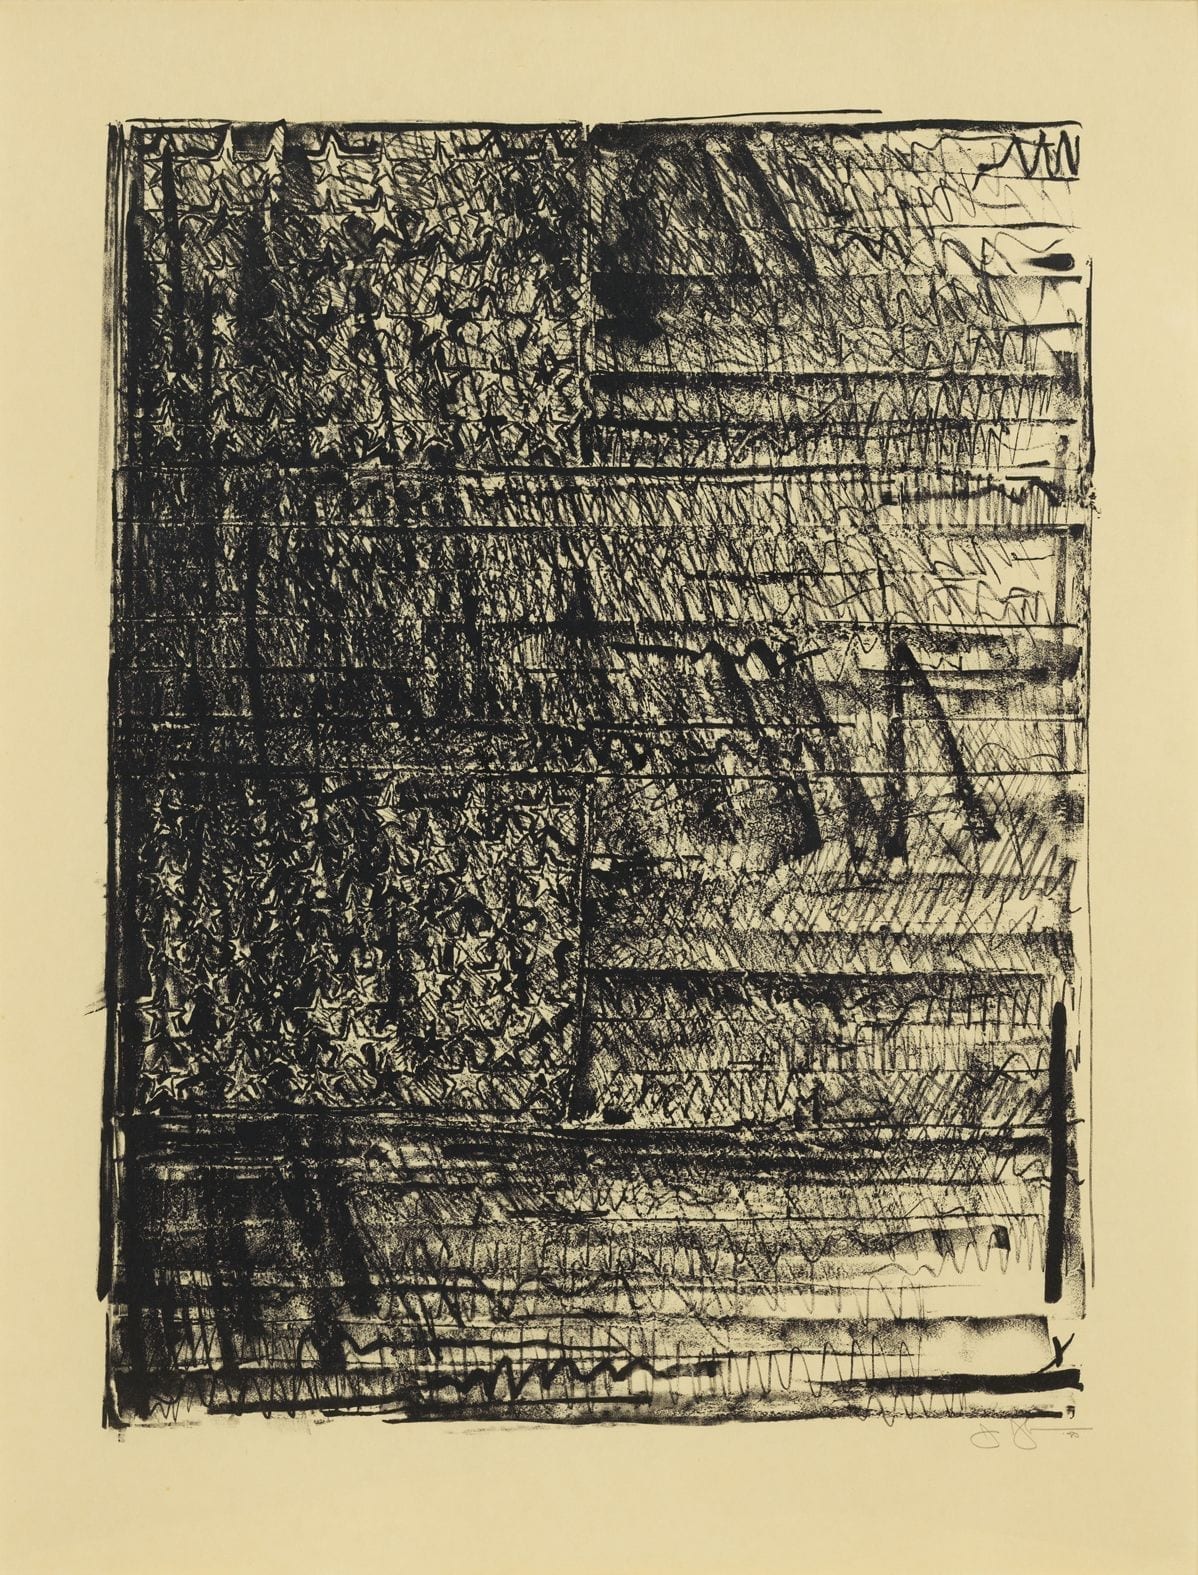 Two Flags by Jasper Johns